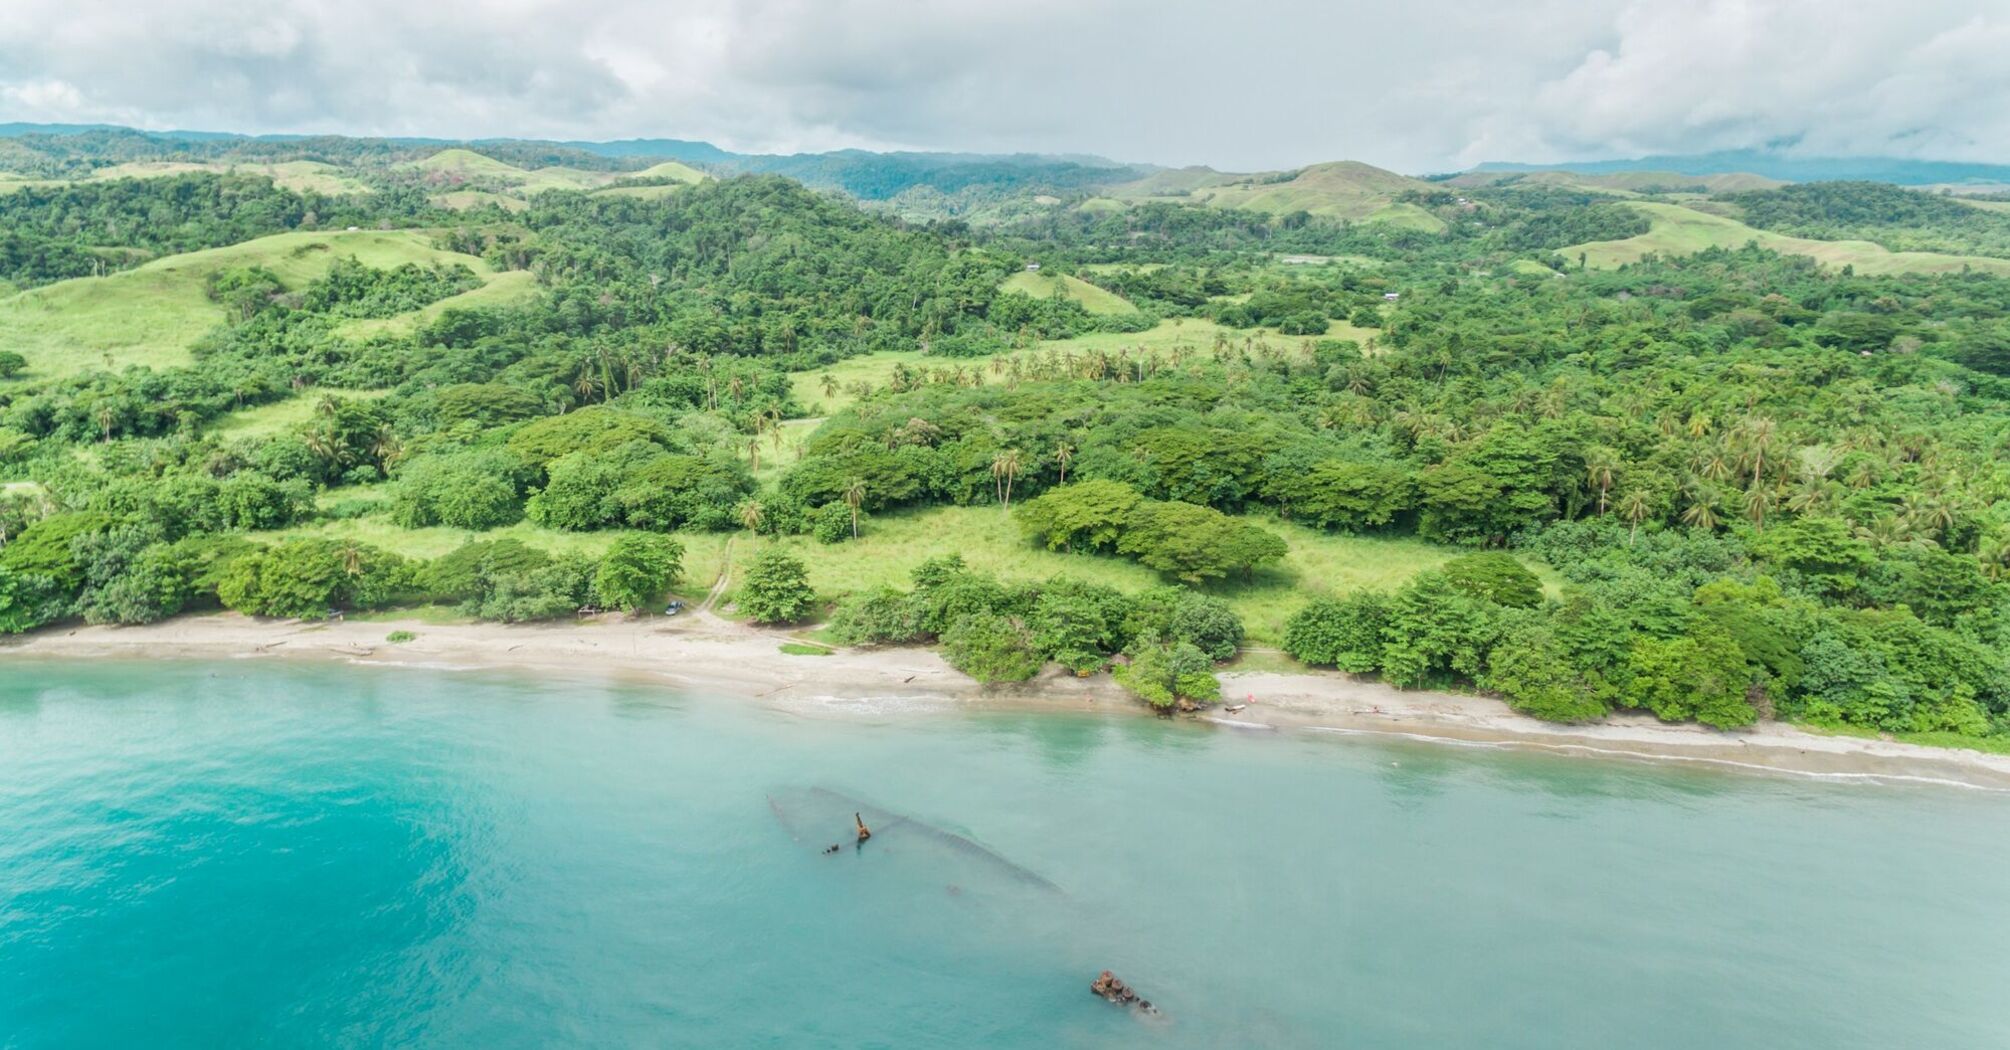 Aerial view of lush green landscape and beach on the Solomon Islands